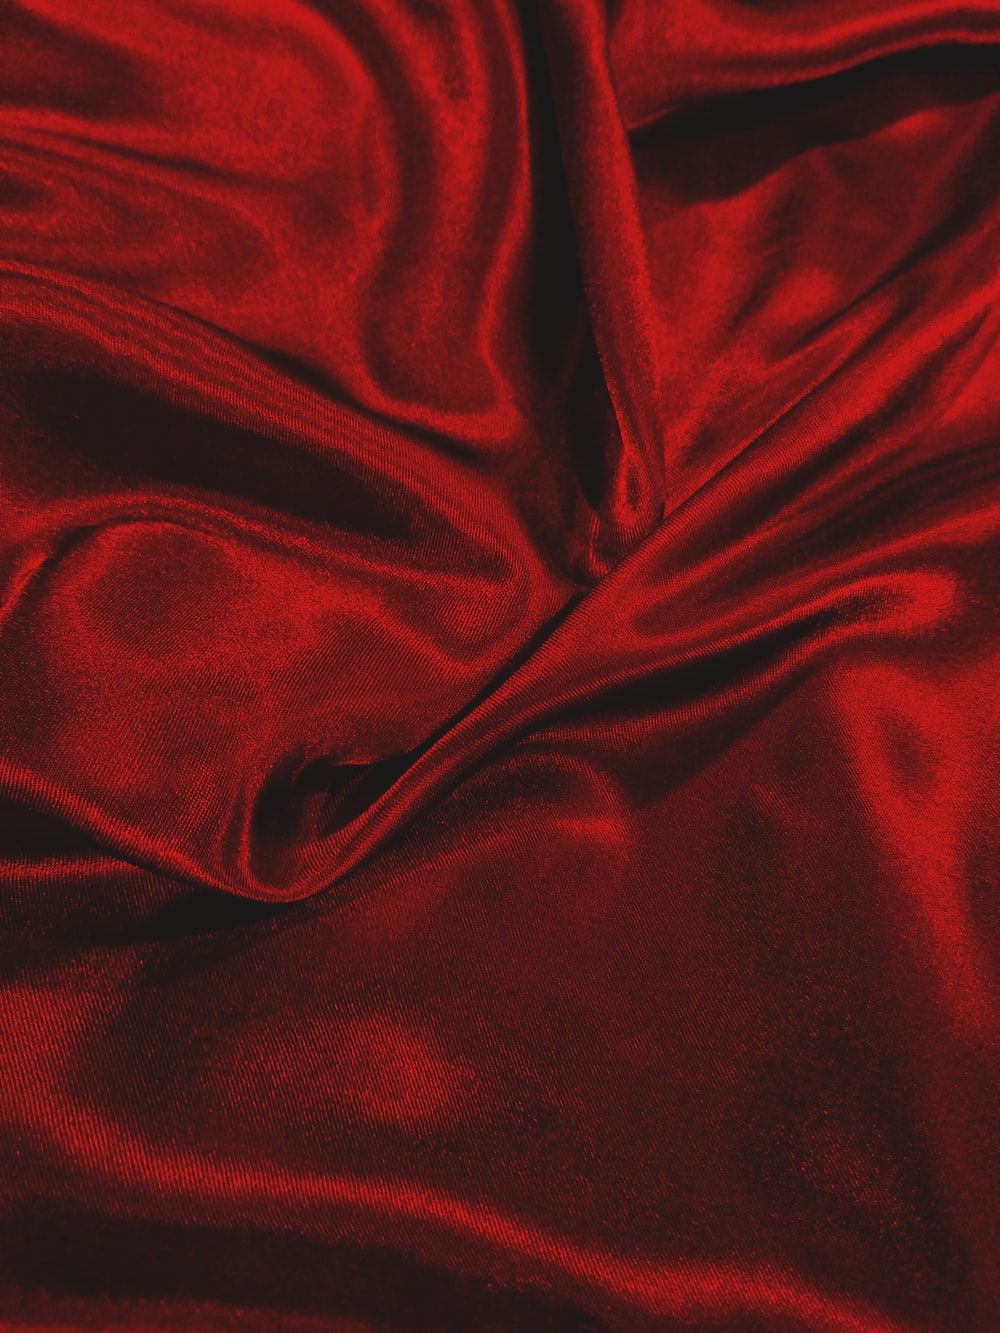 A close up of a red velvet fabric. - Silk